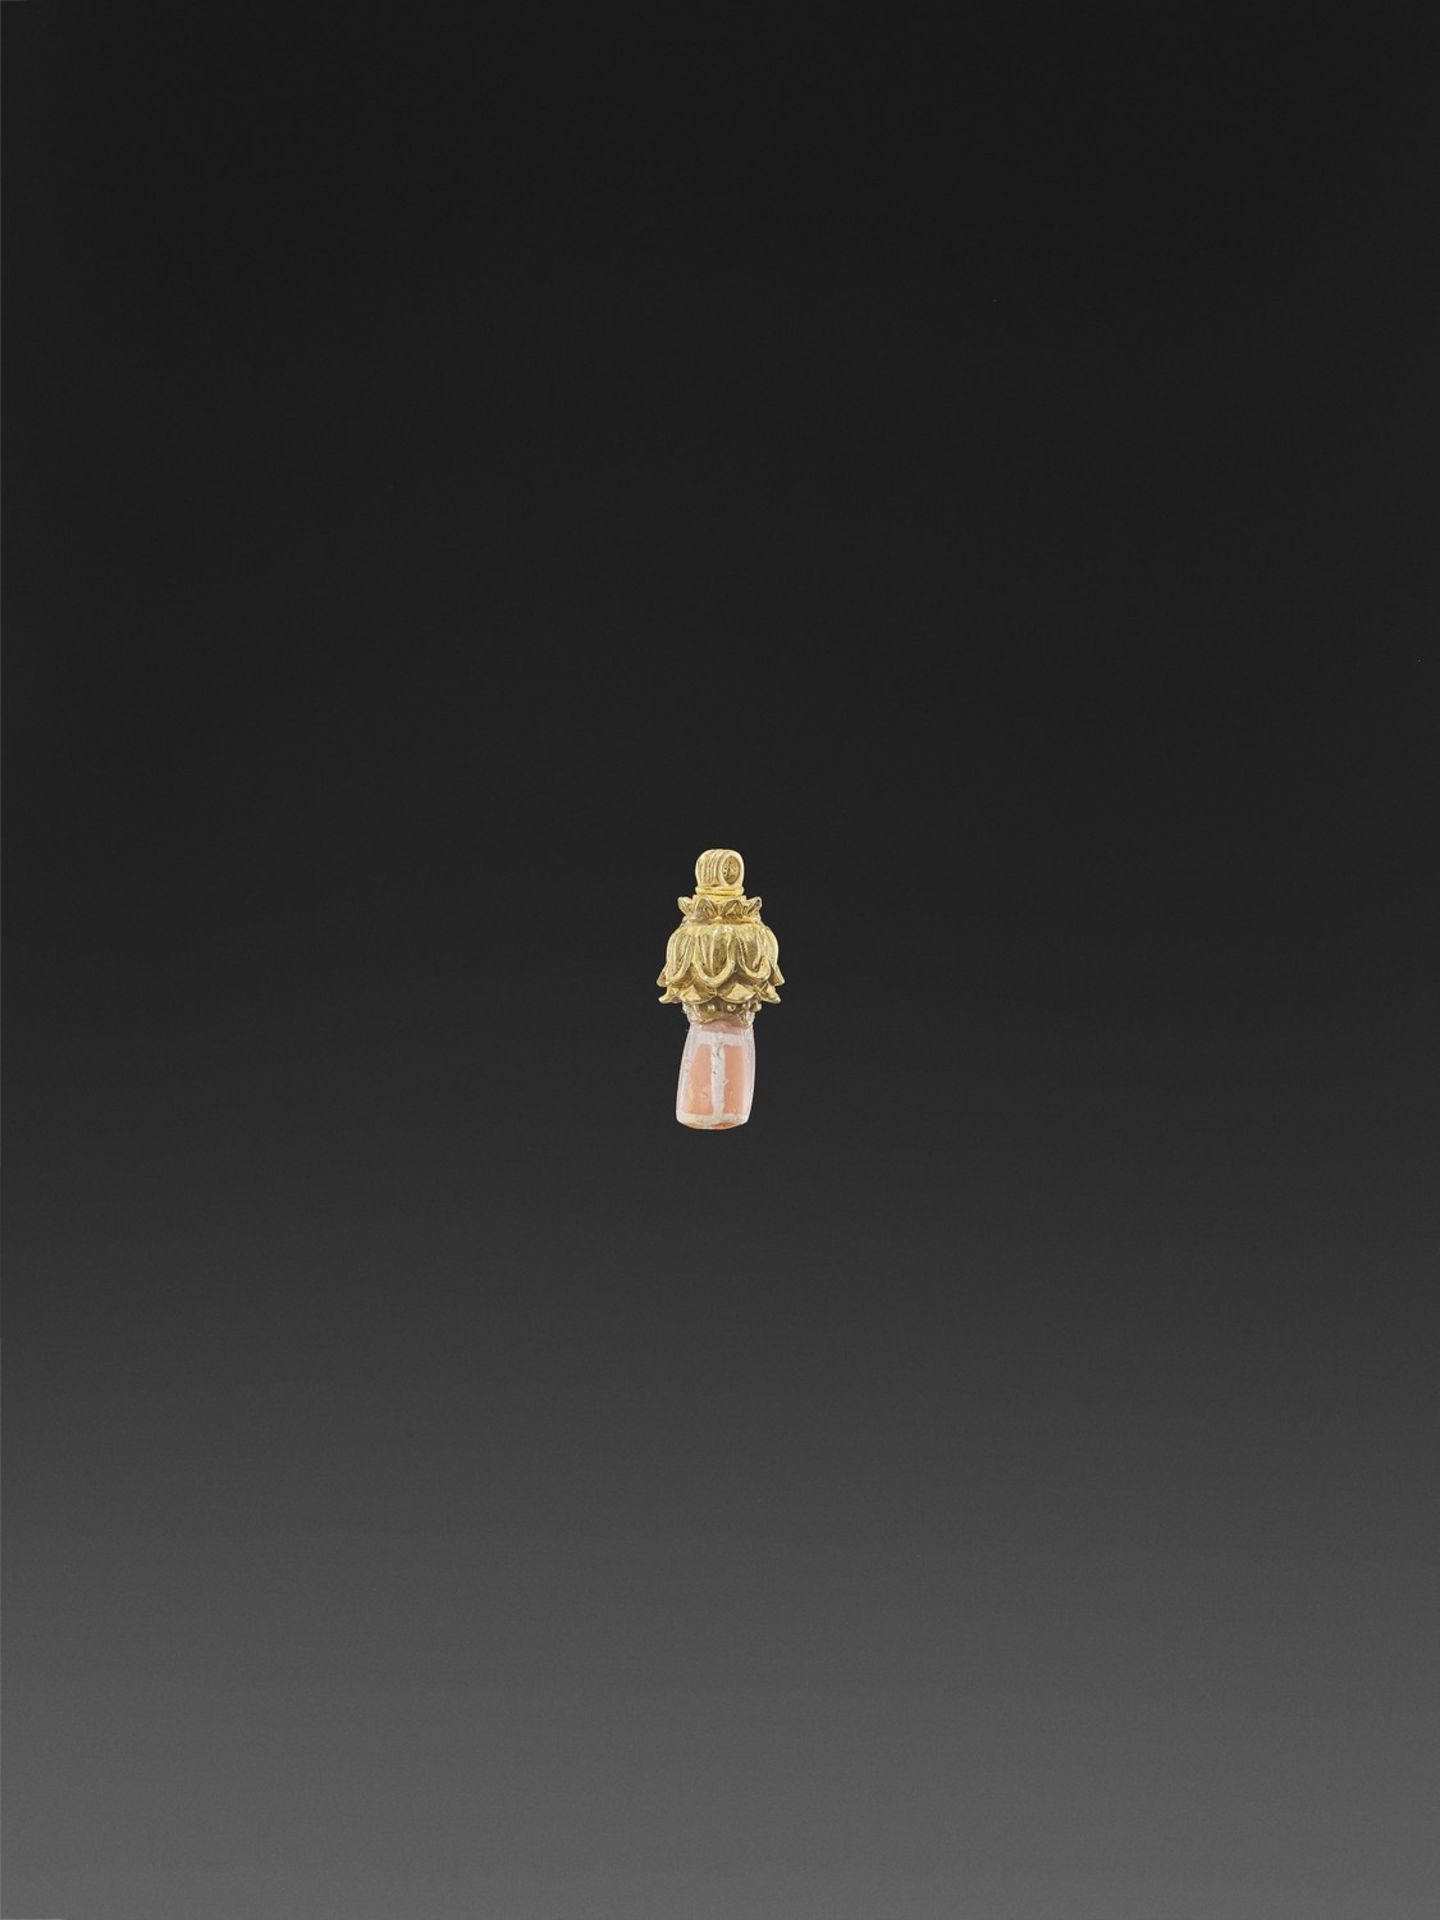 A PYU GOLD ‘LOTUS’ PENDANT WITH AGATE BEAD - Image 2 of 4